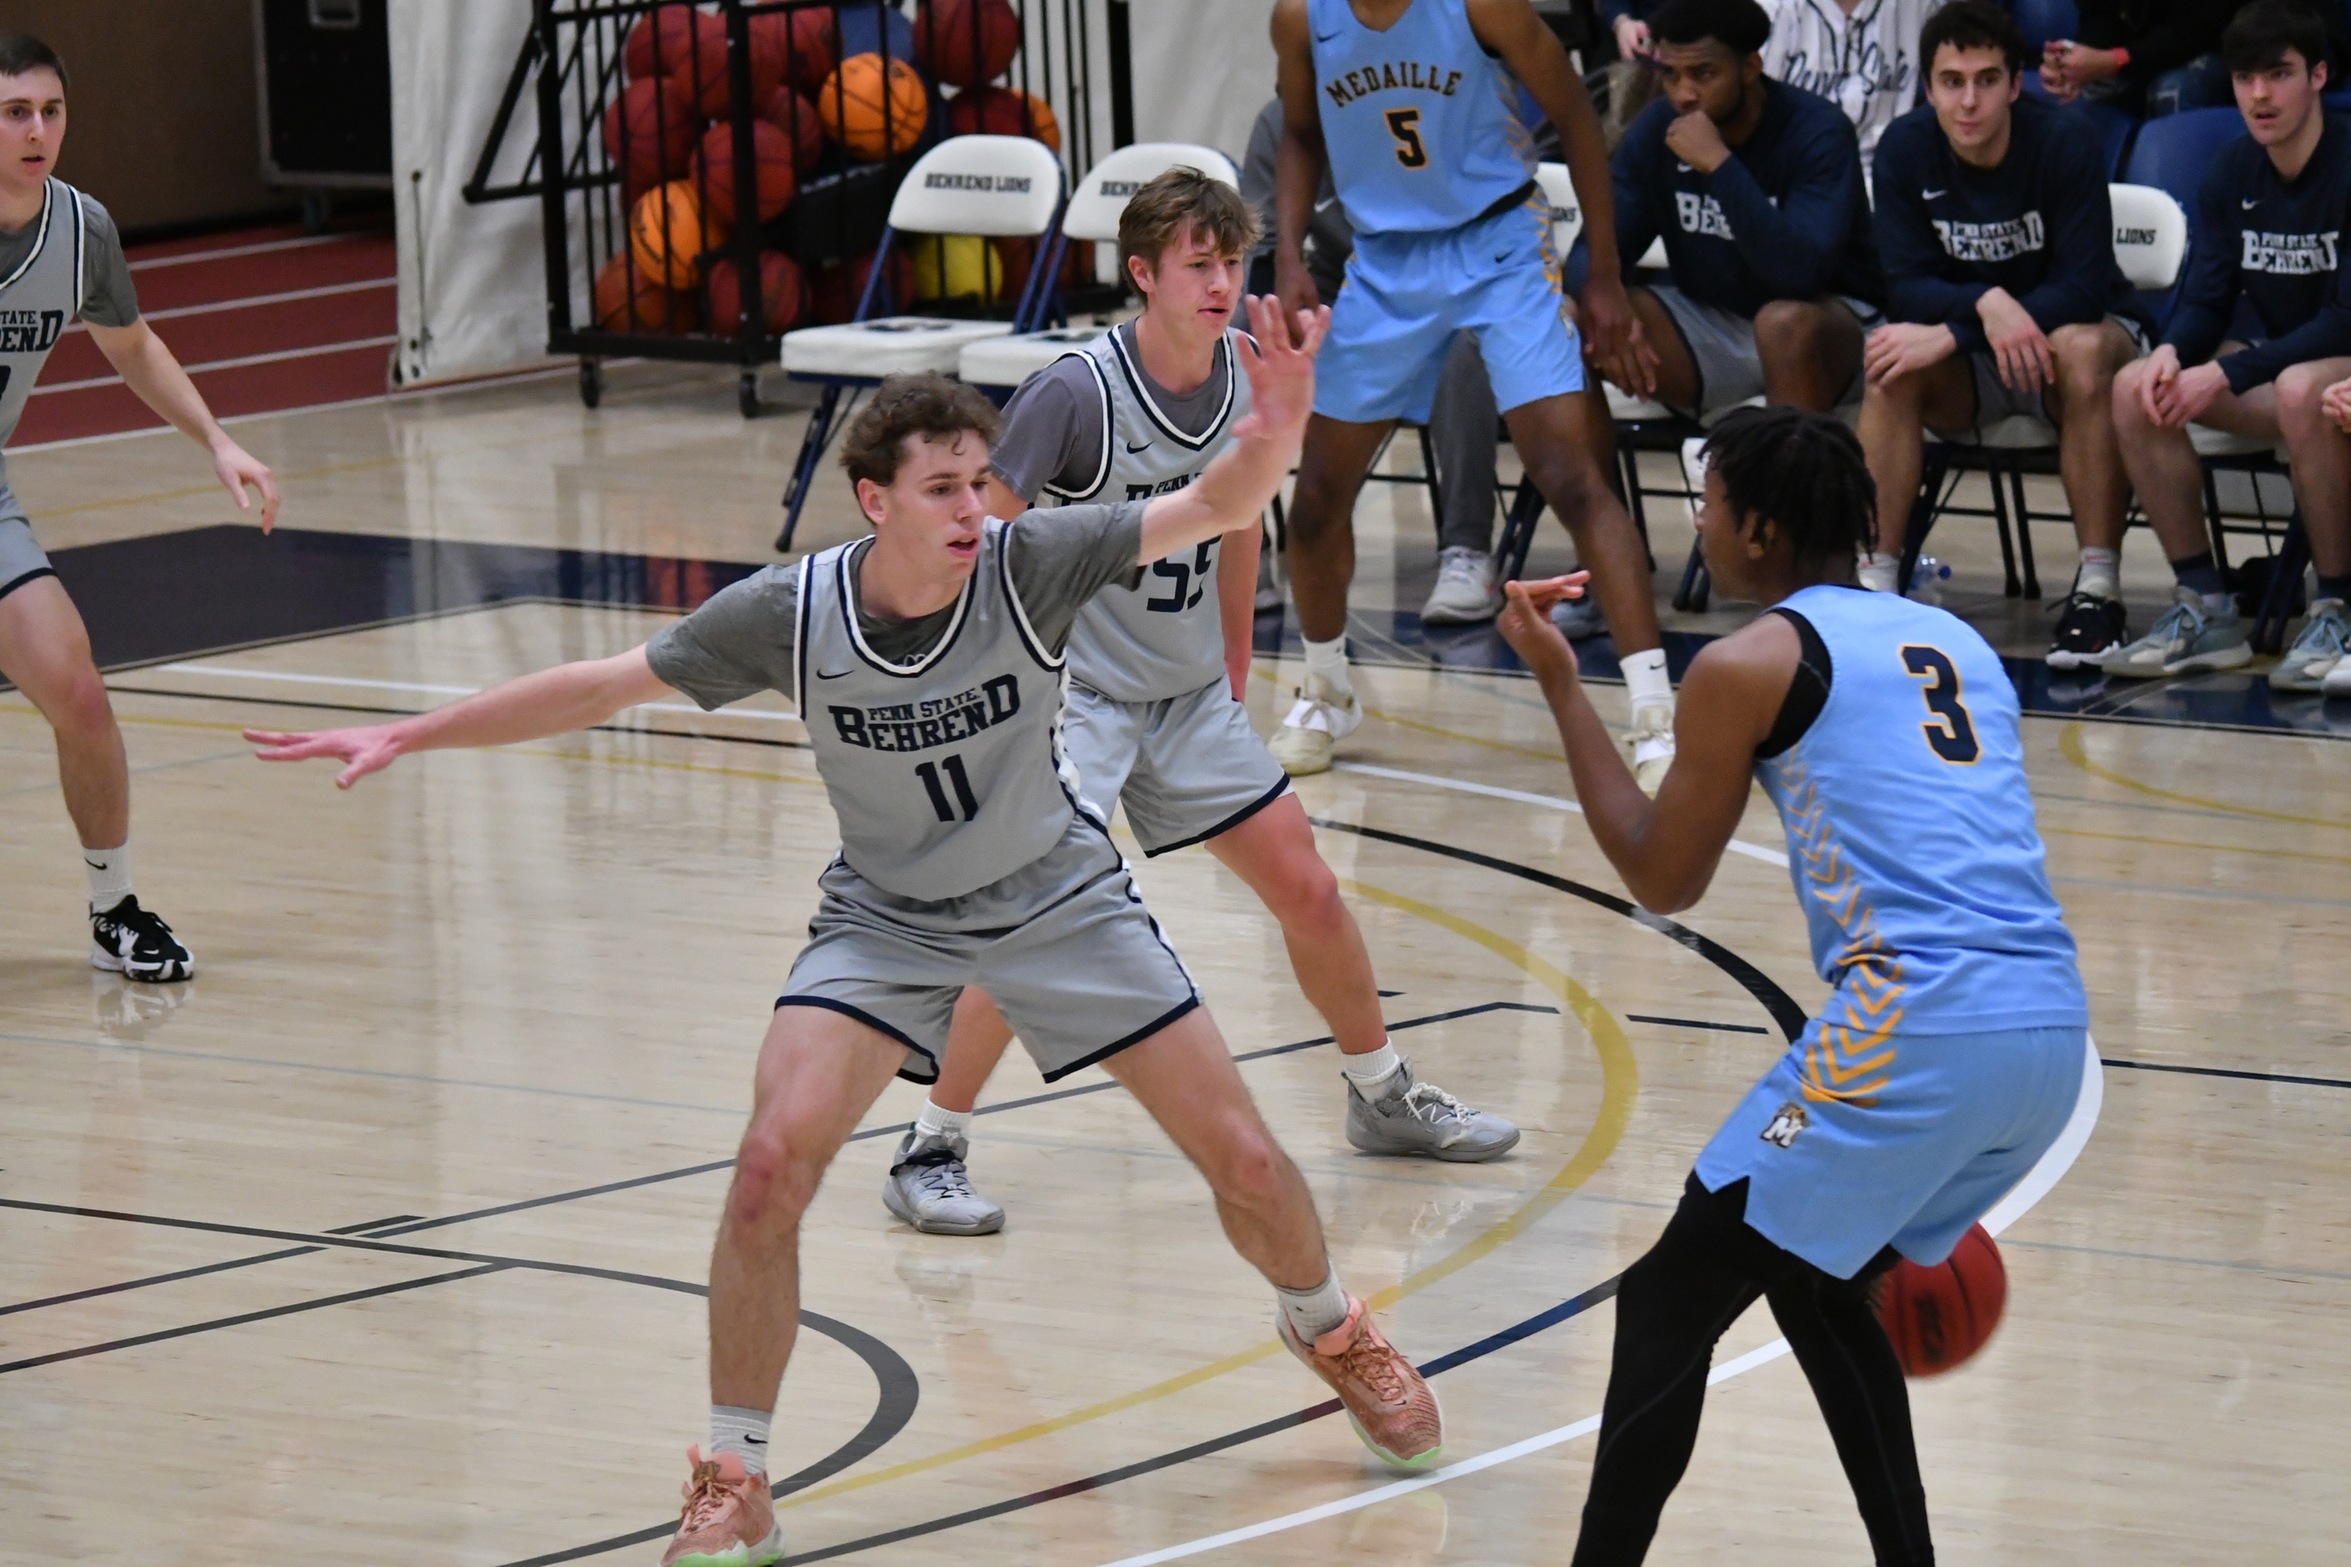 Lions Open 2022 With Win Over Tartans